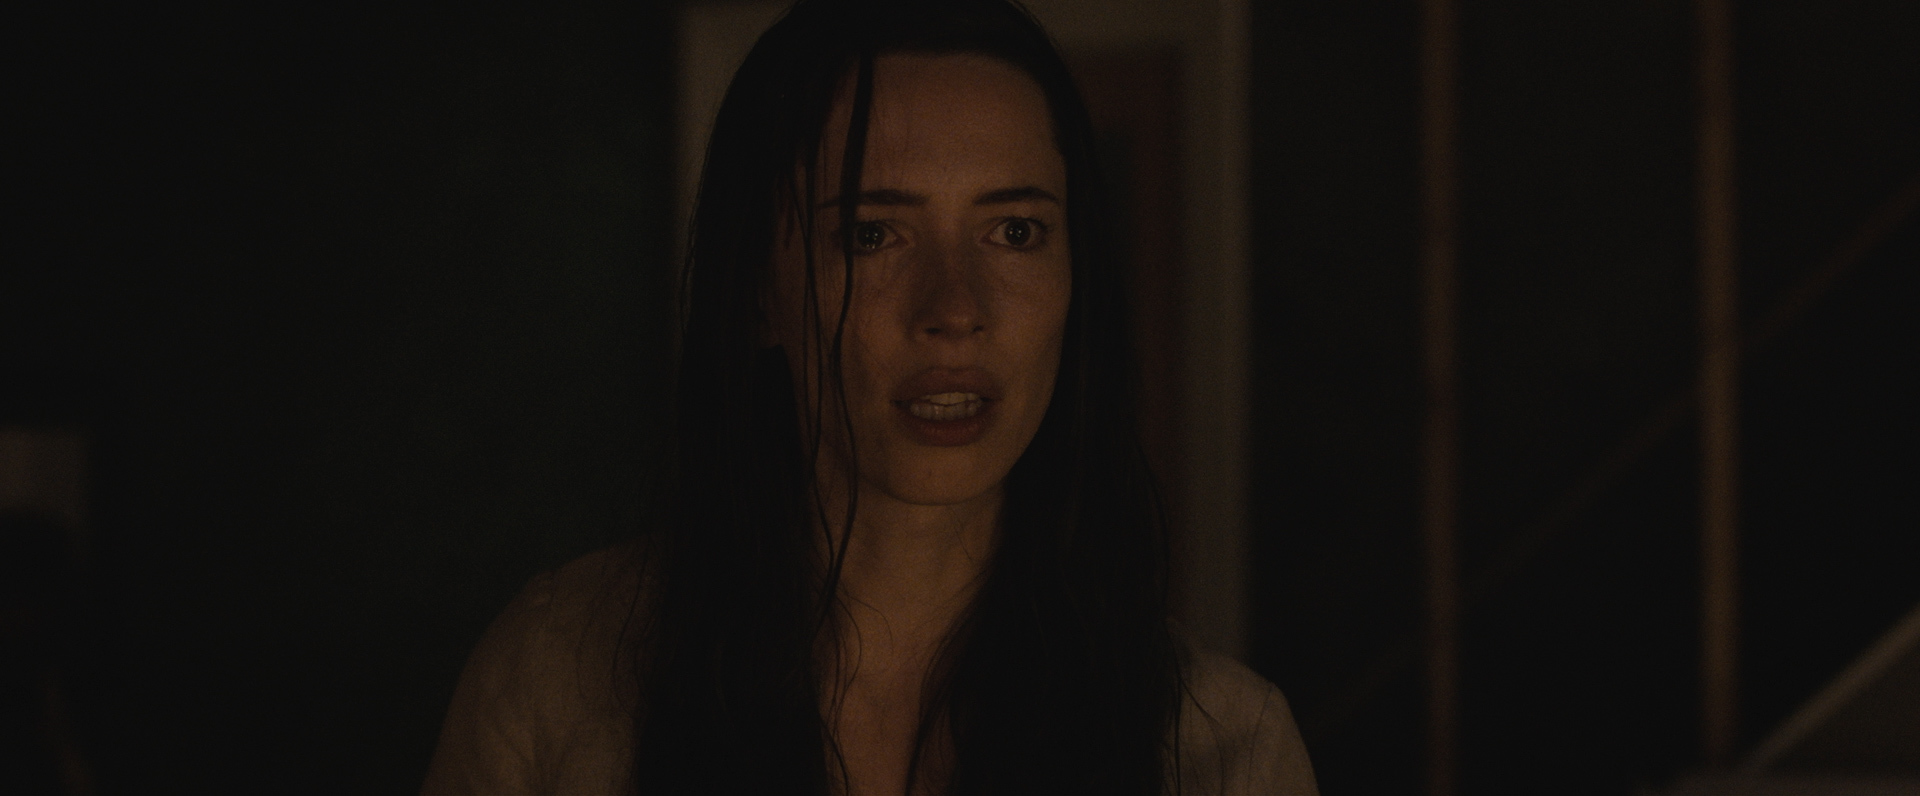 The Night House Review: Rebecca Hall Is Remarkable In This Odd Horror